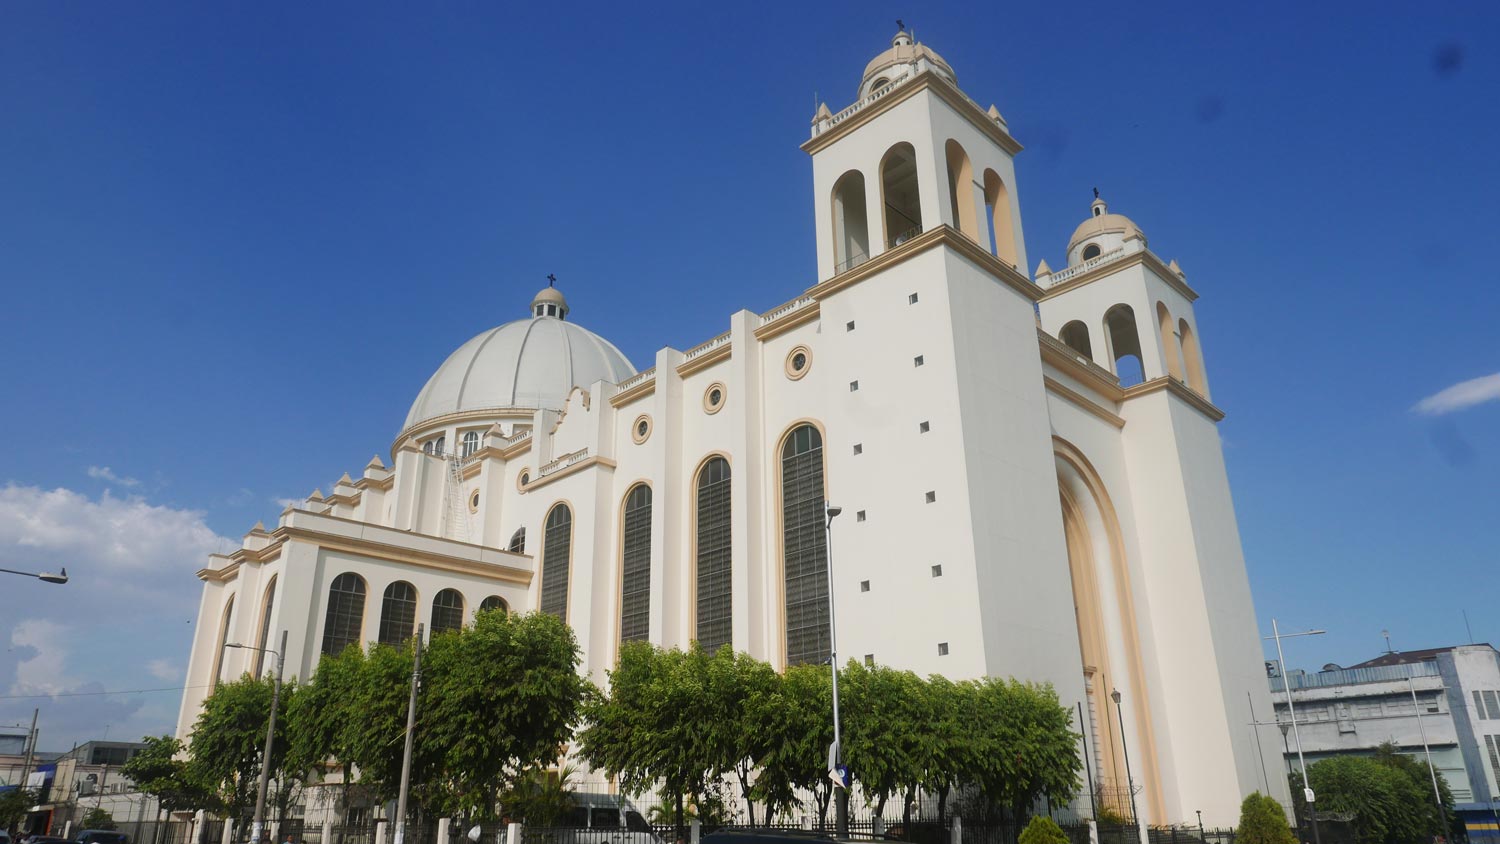 Exterior of the cathedral of San Salvador